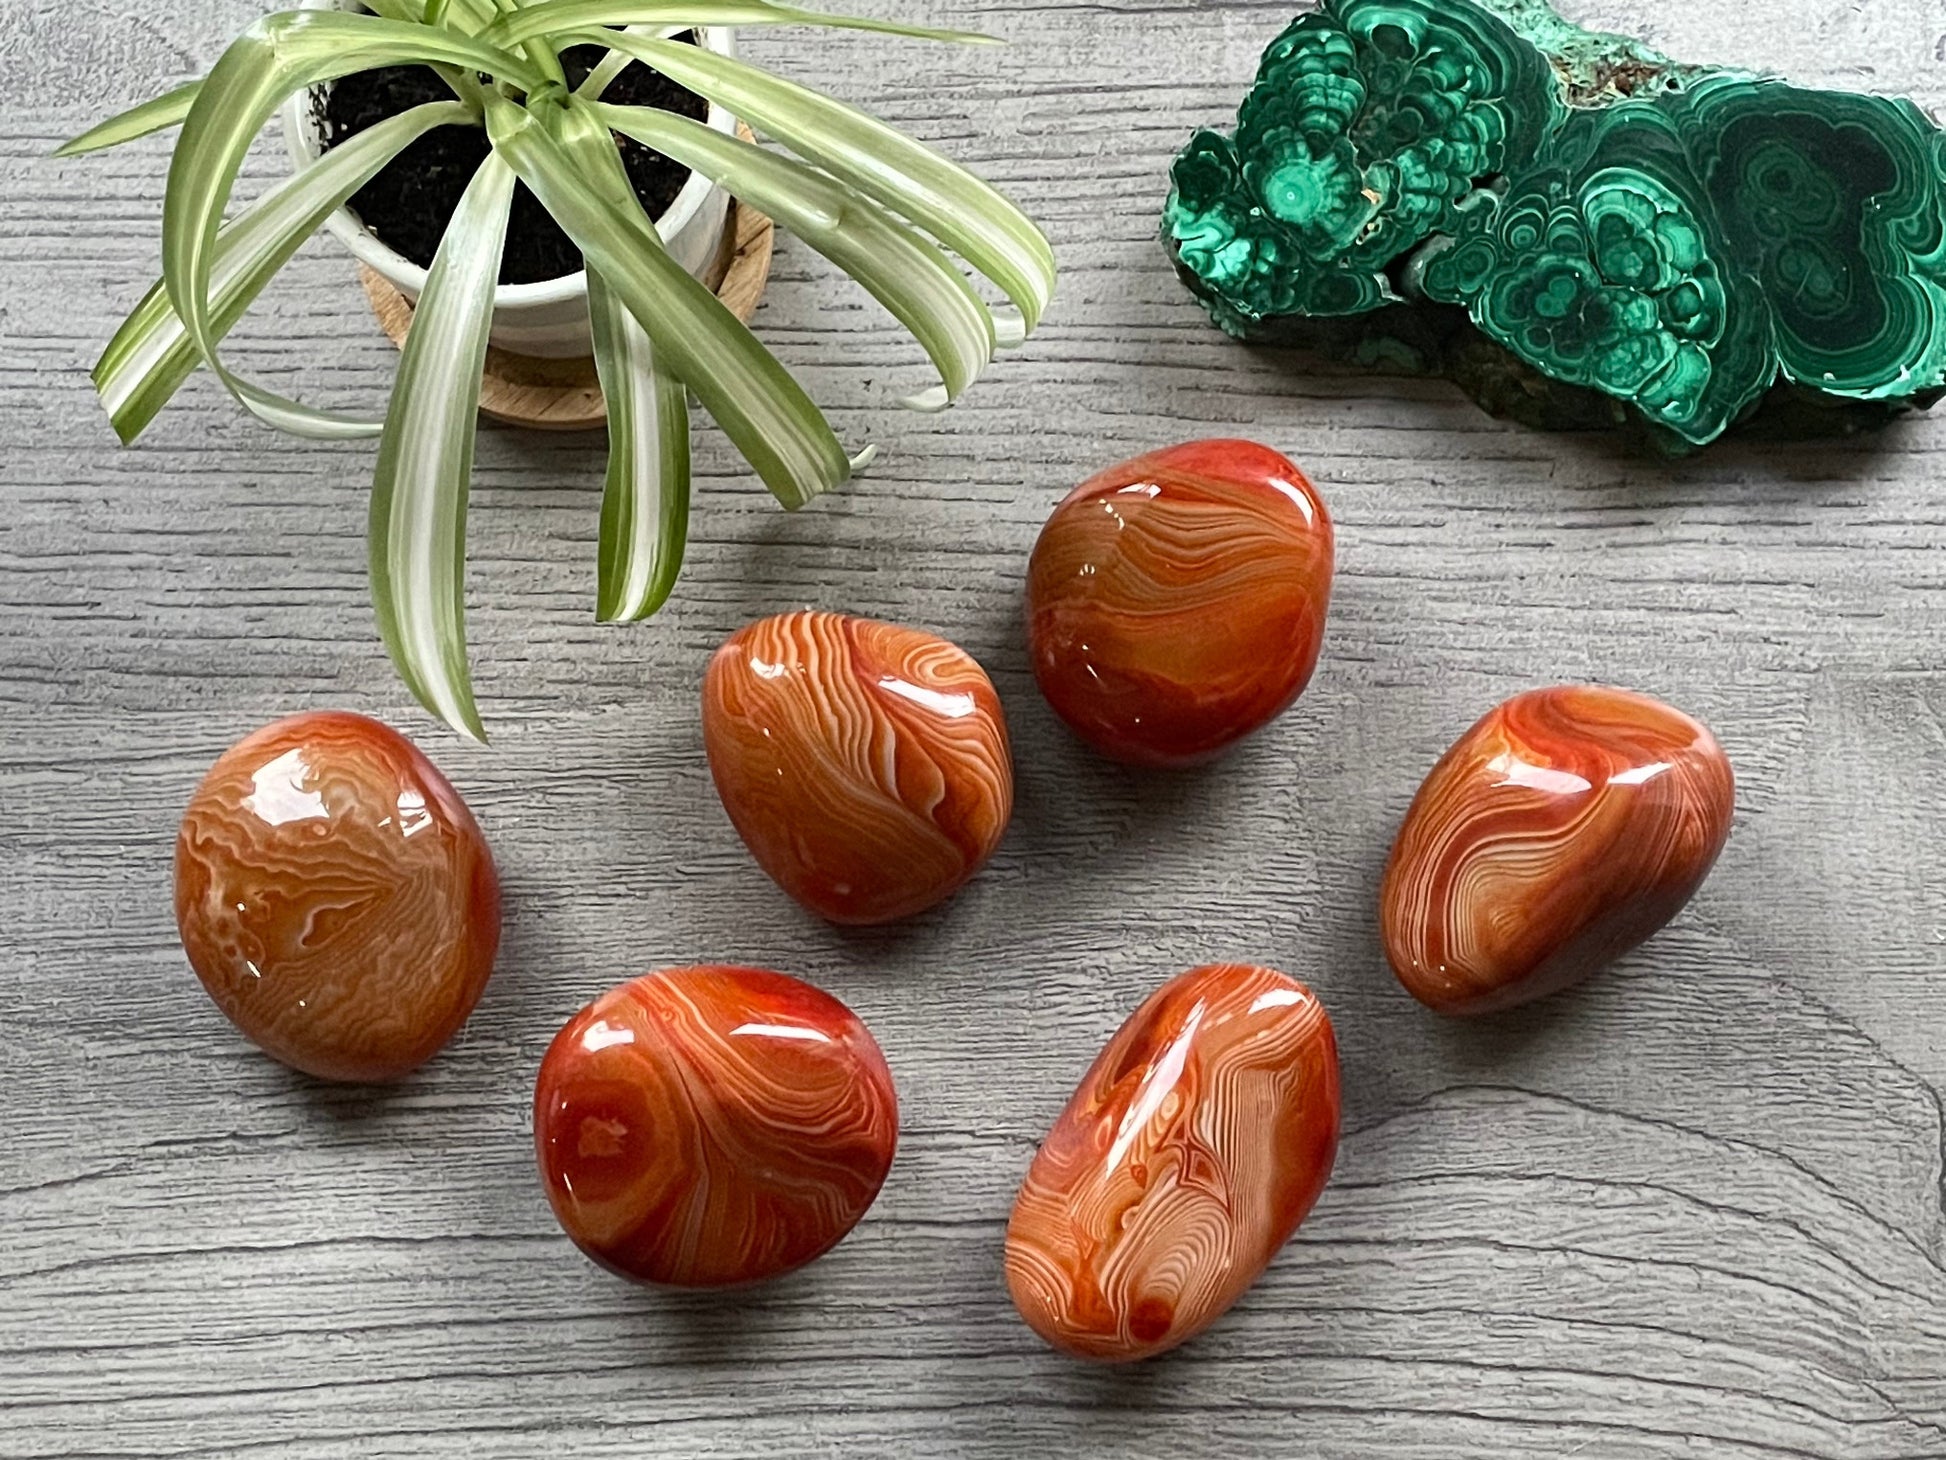 Pictured are various polished red sardonyx palm stones.